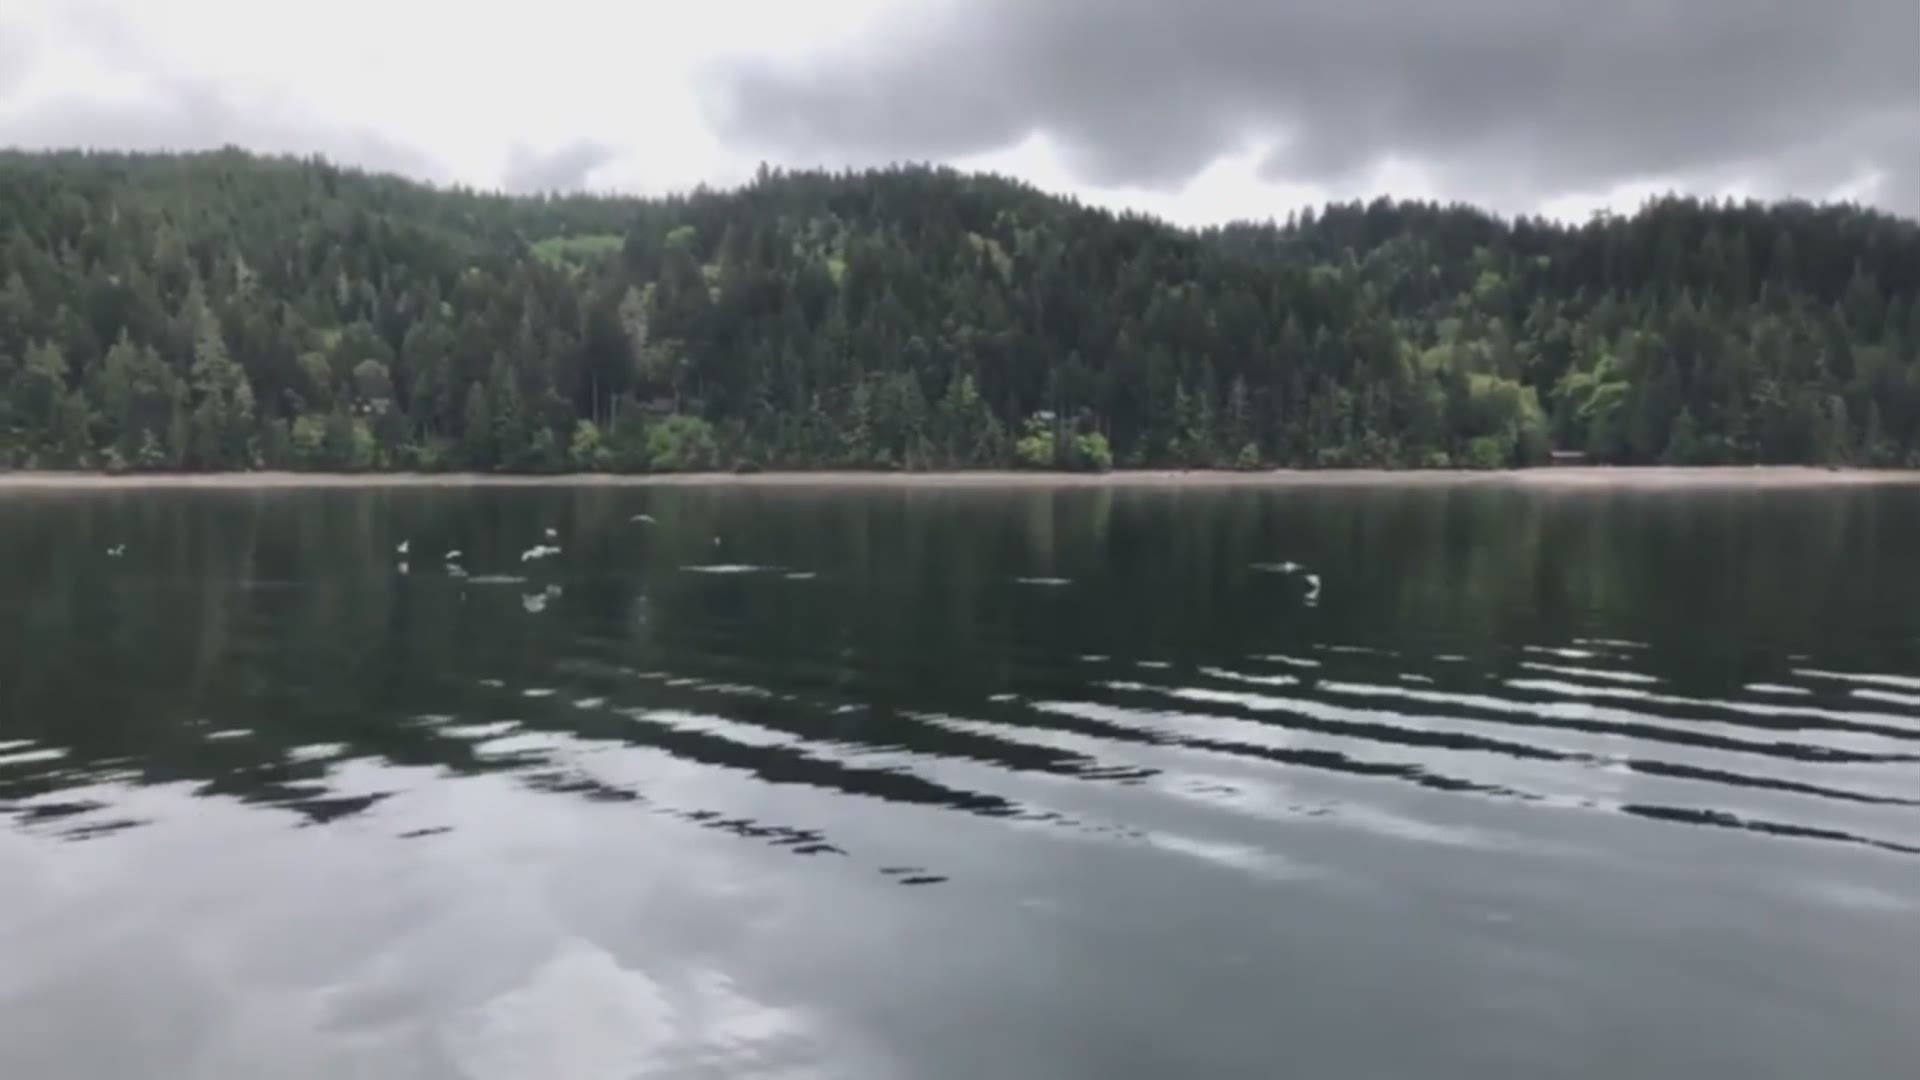 Puget Sound Express whale watching tour discovered a pod of transient orcas in Puget Sound on April 30. Footage taken by Renee Beitzel captured the audio of the T65A pod vocalizing after a suspected kill.